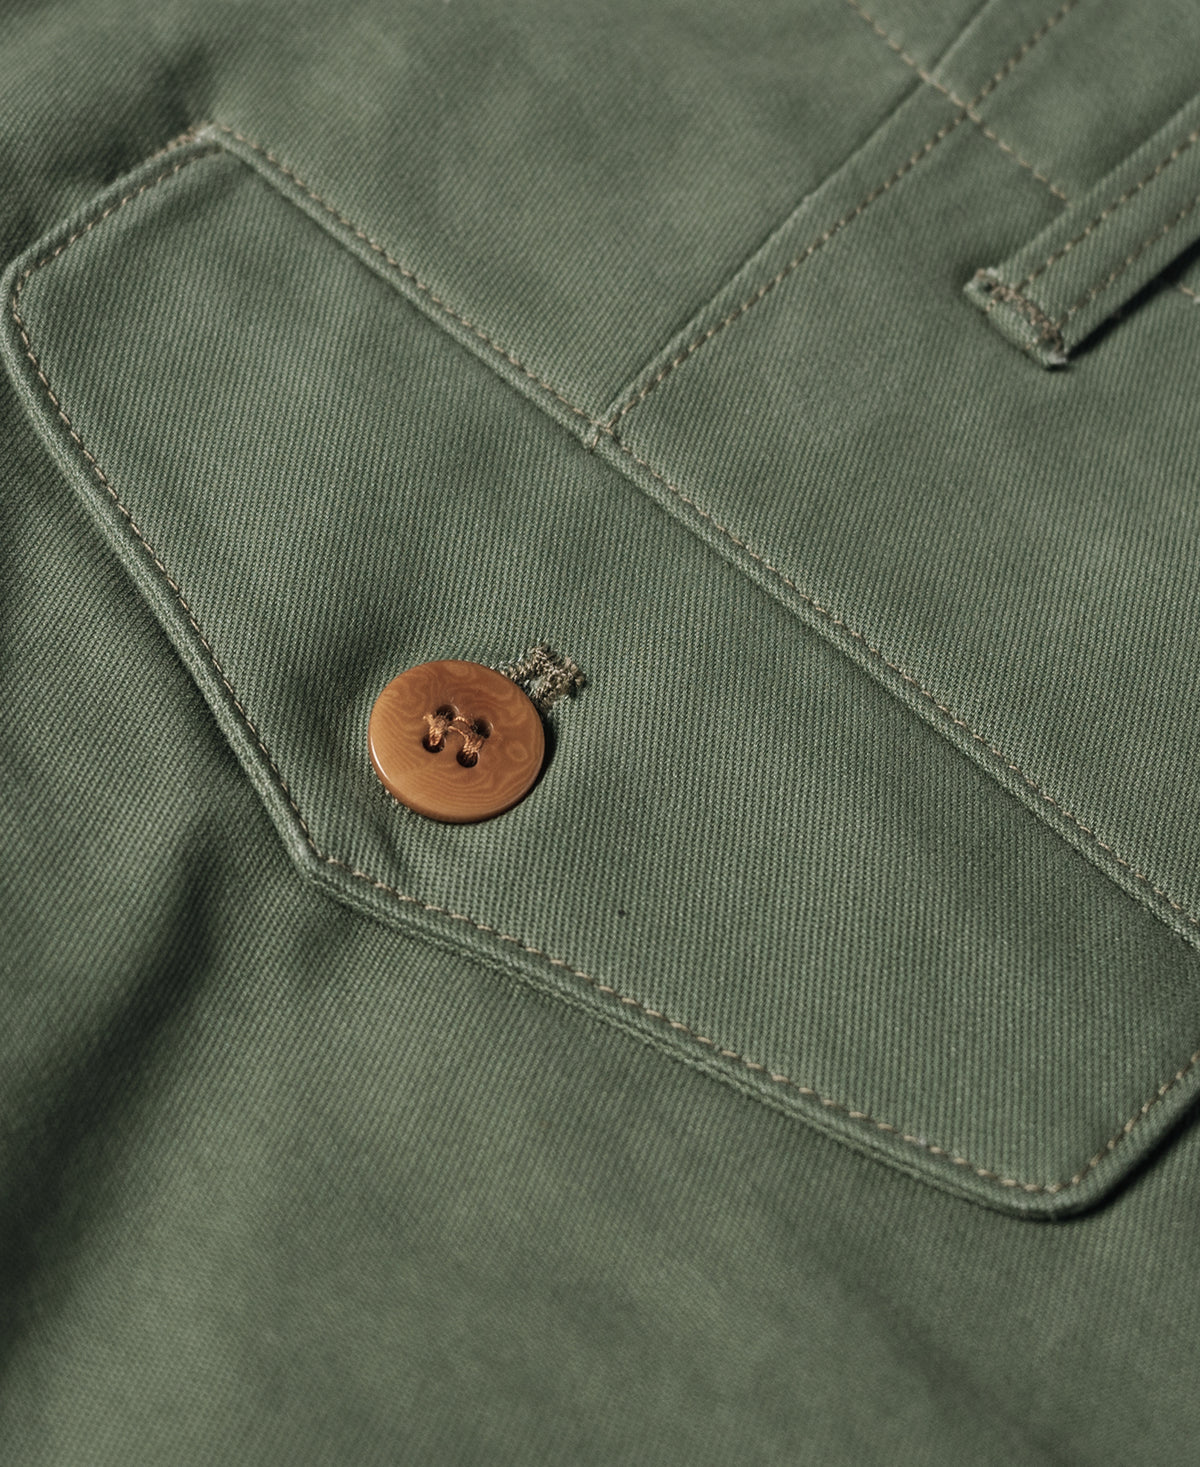 1944 USMC Officer Trousers - Olive